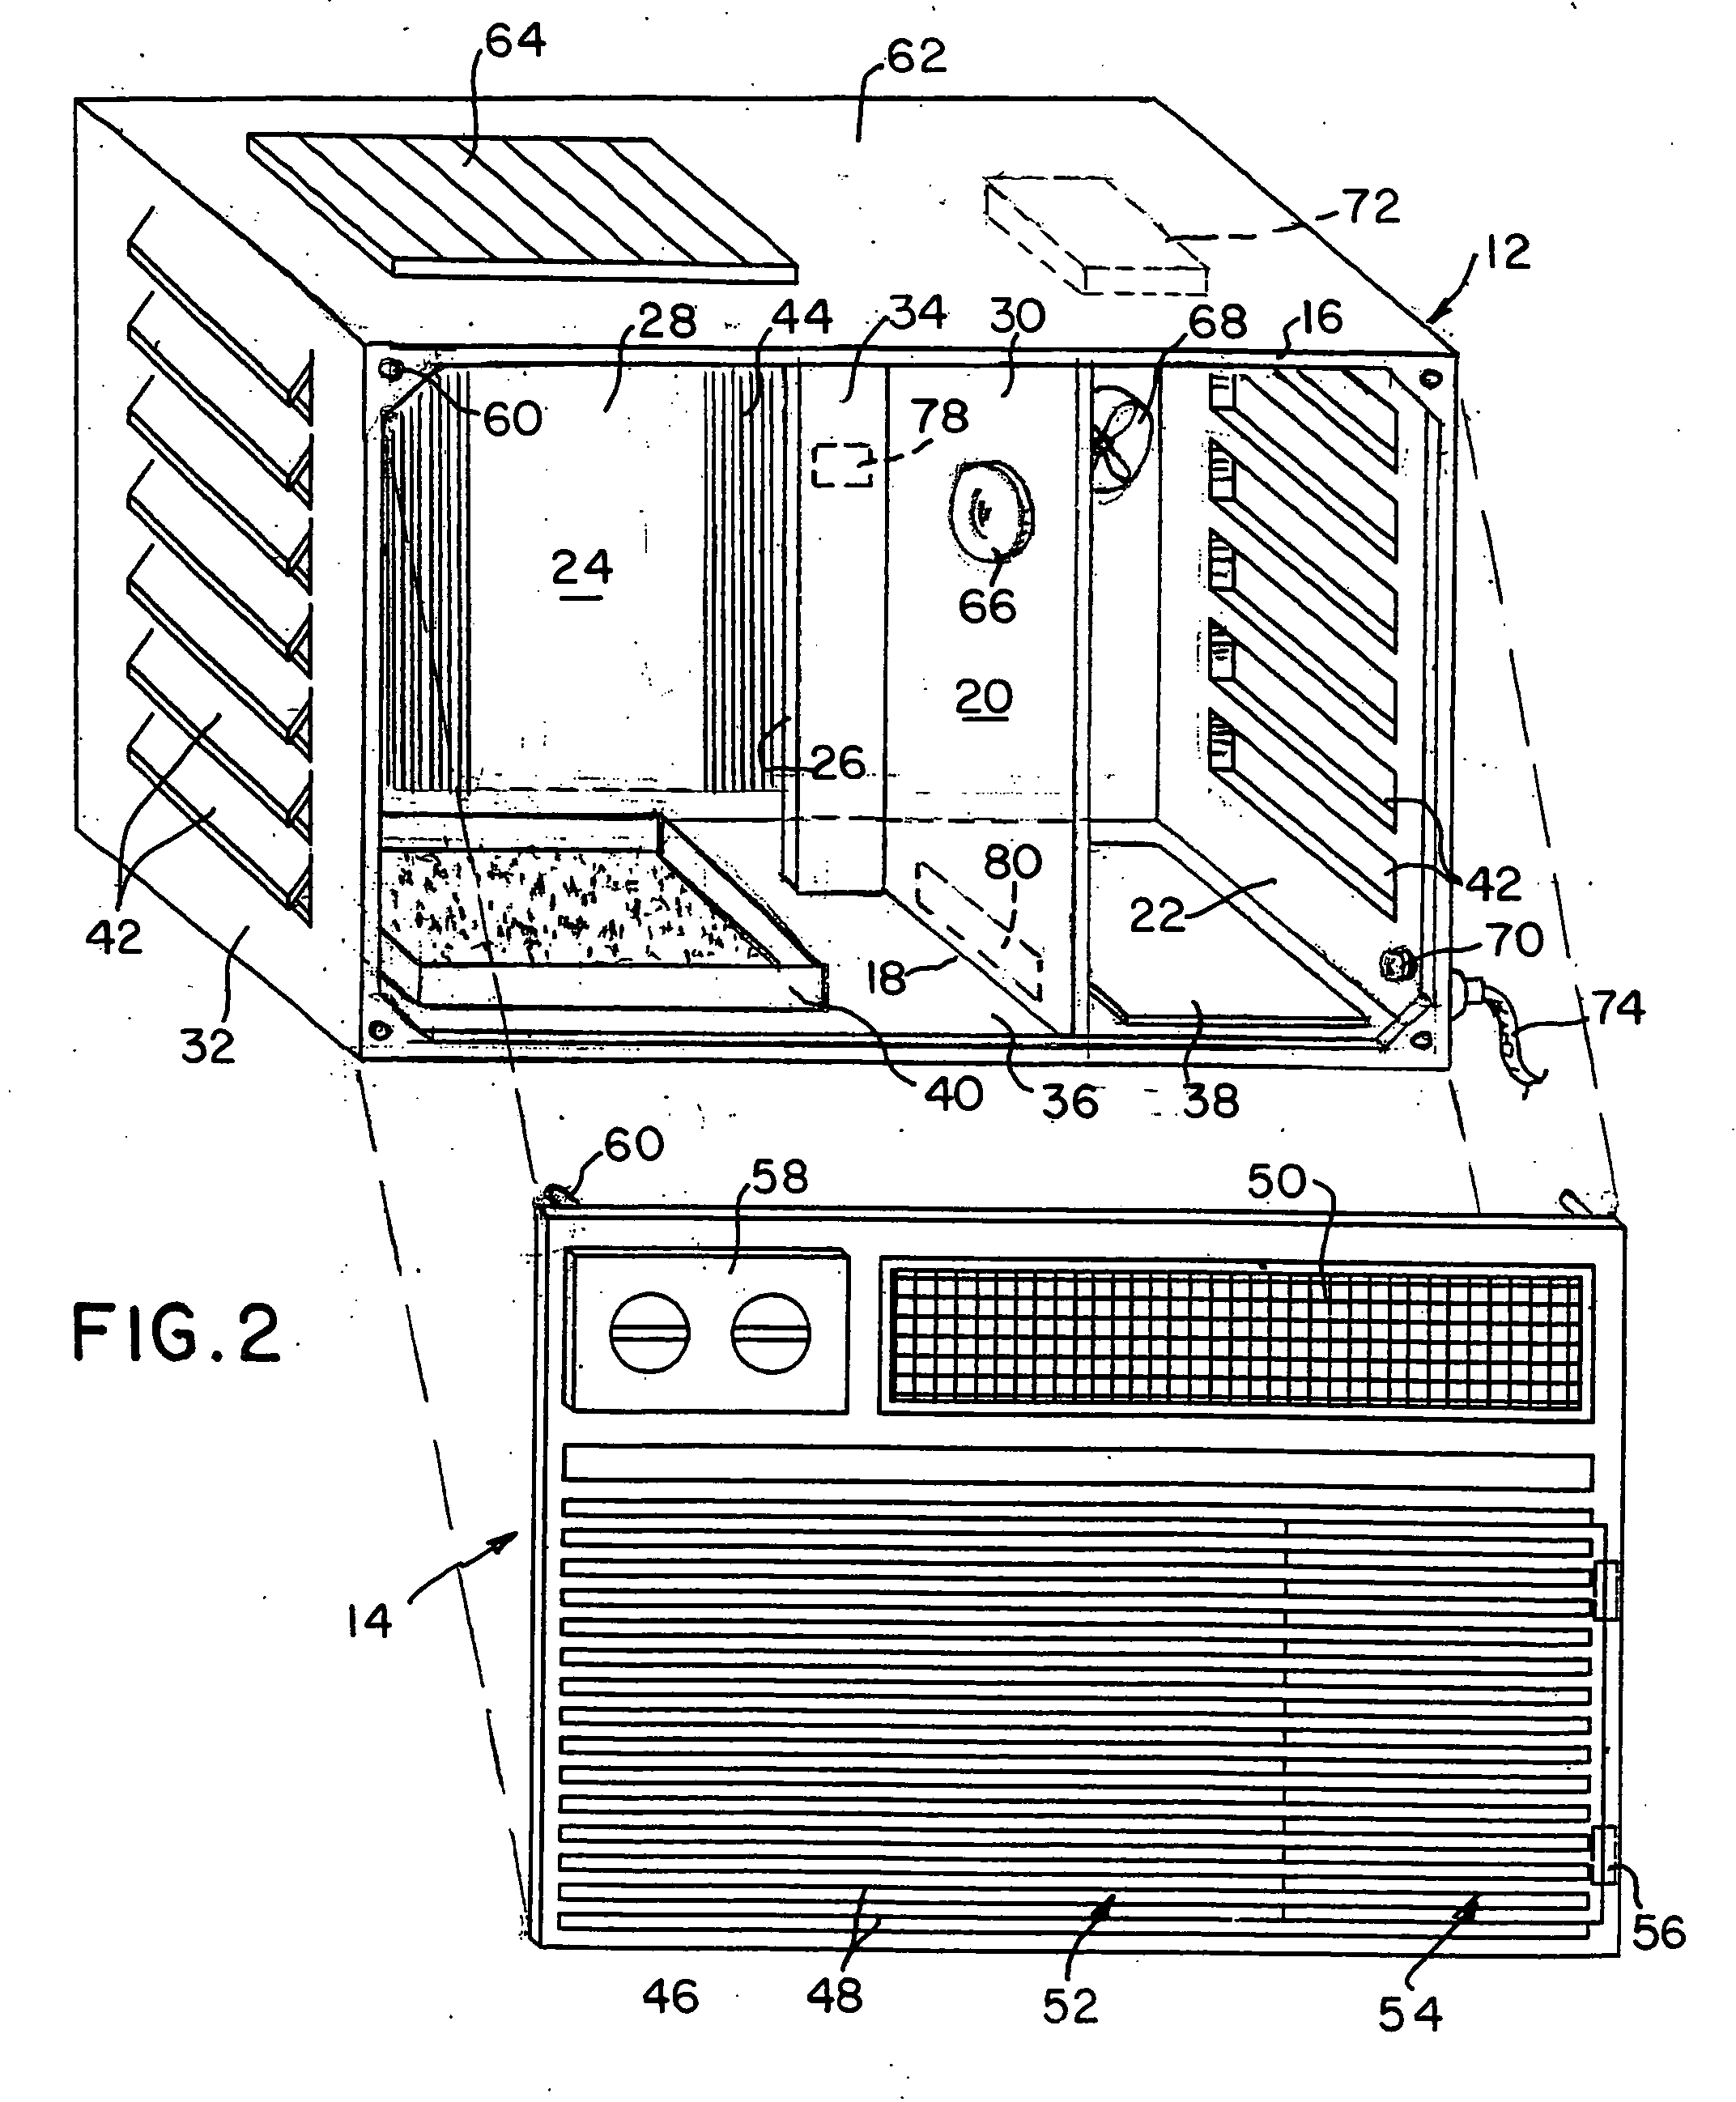 Animal housing structure and apparatus